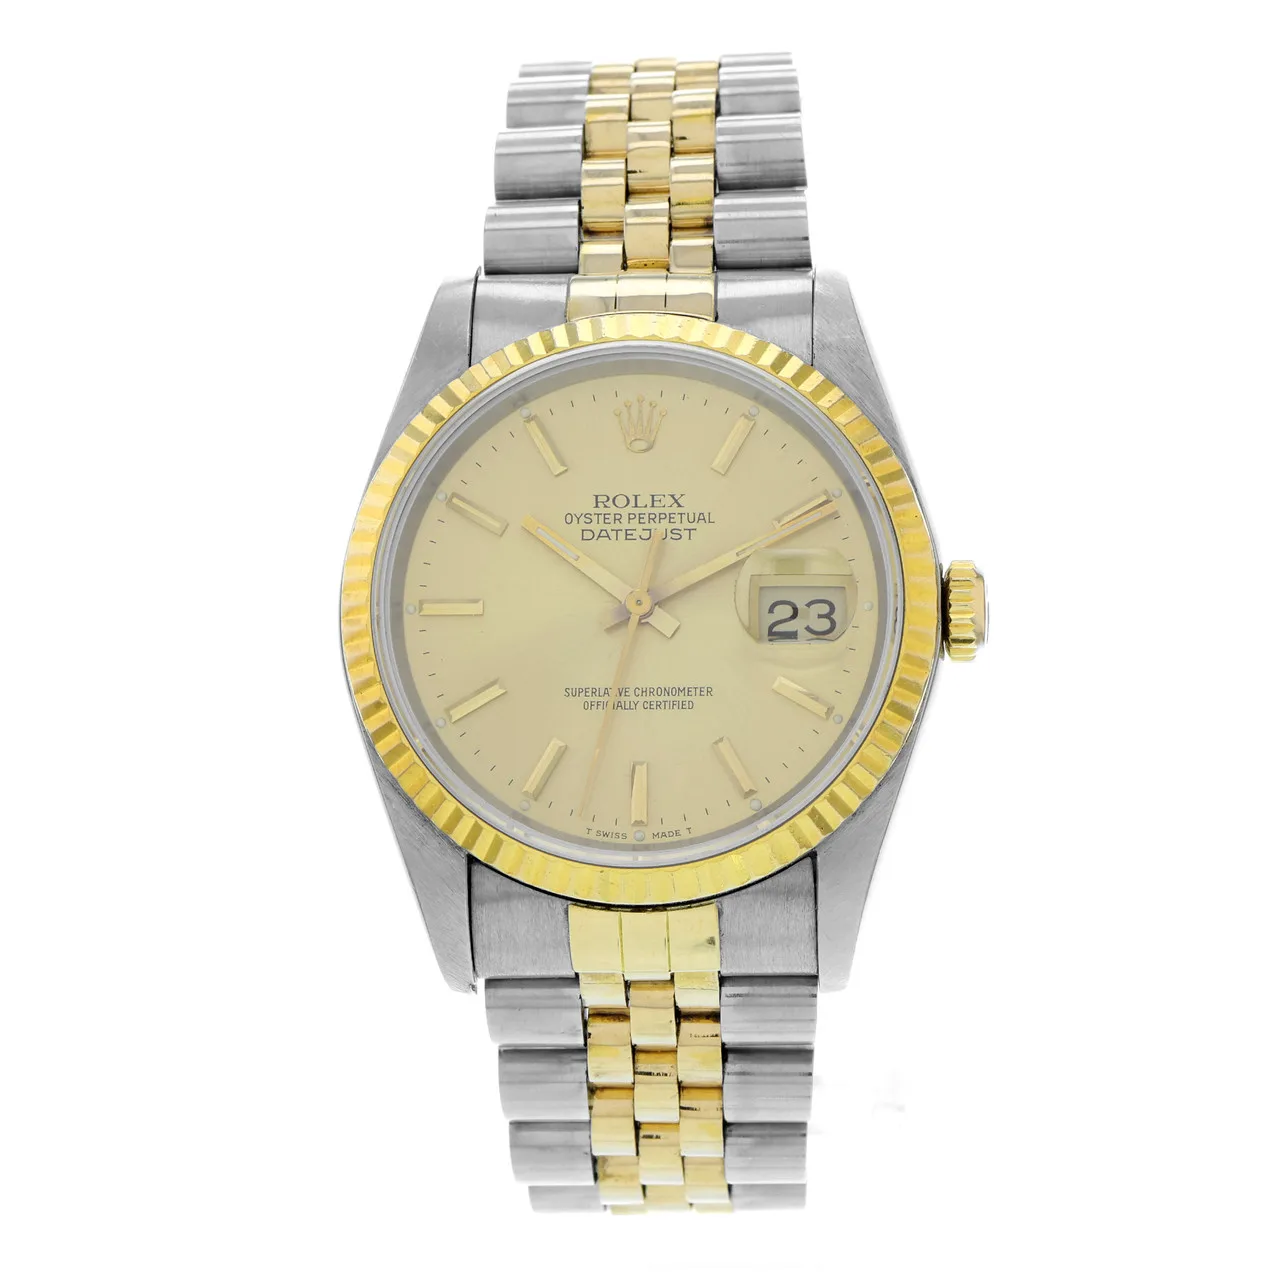 1989 Rolex Datejust 36 Two-Tone / Fluted / Champagne / Jubilee 16233 Listing Image 1